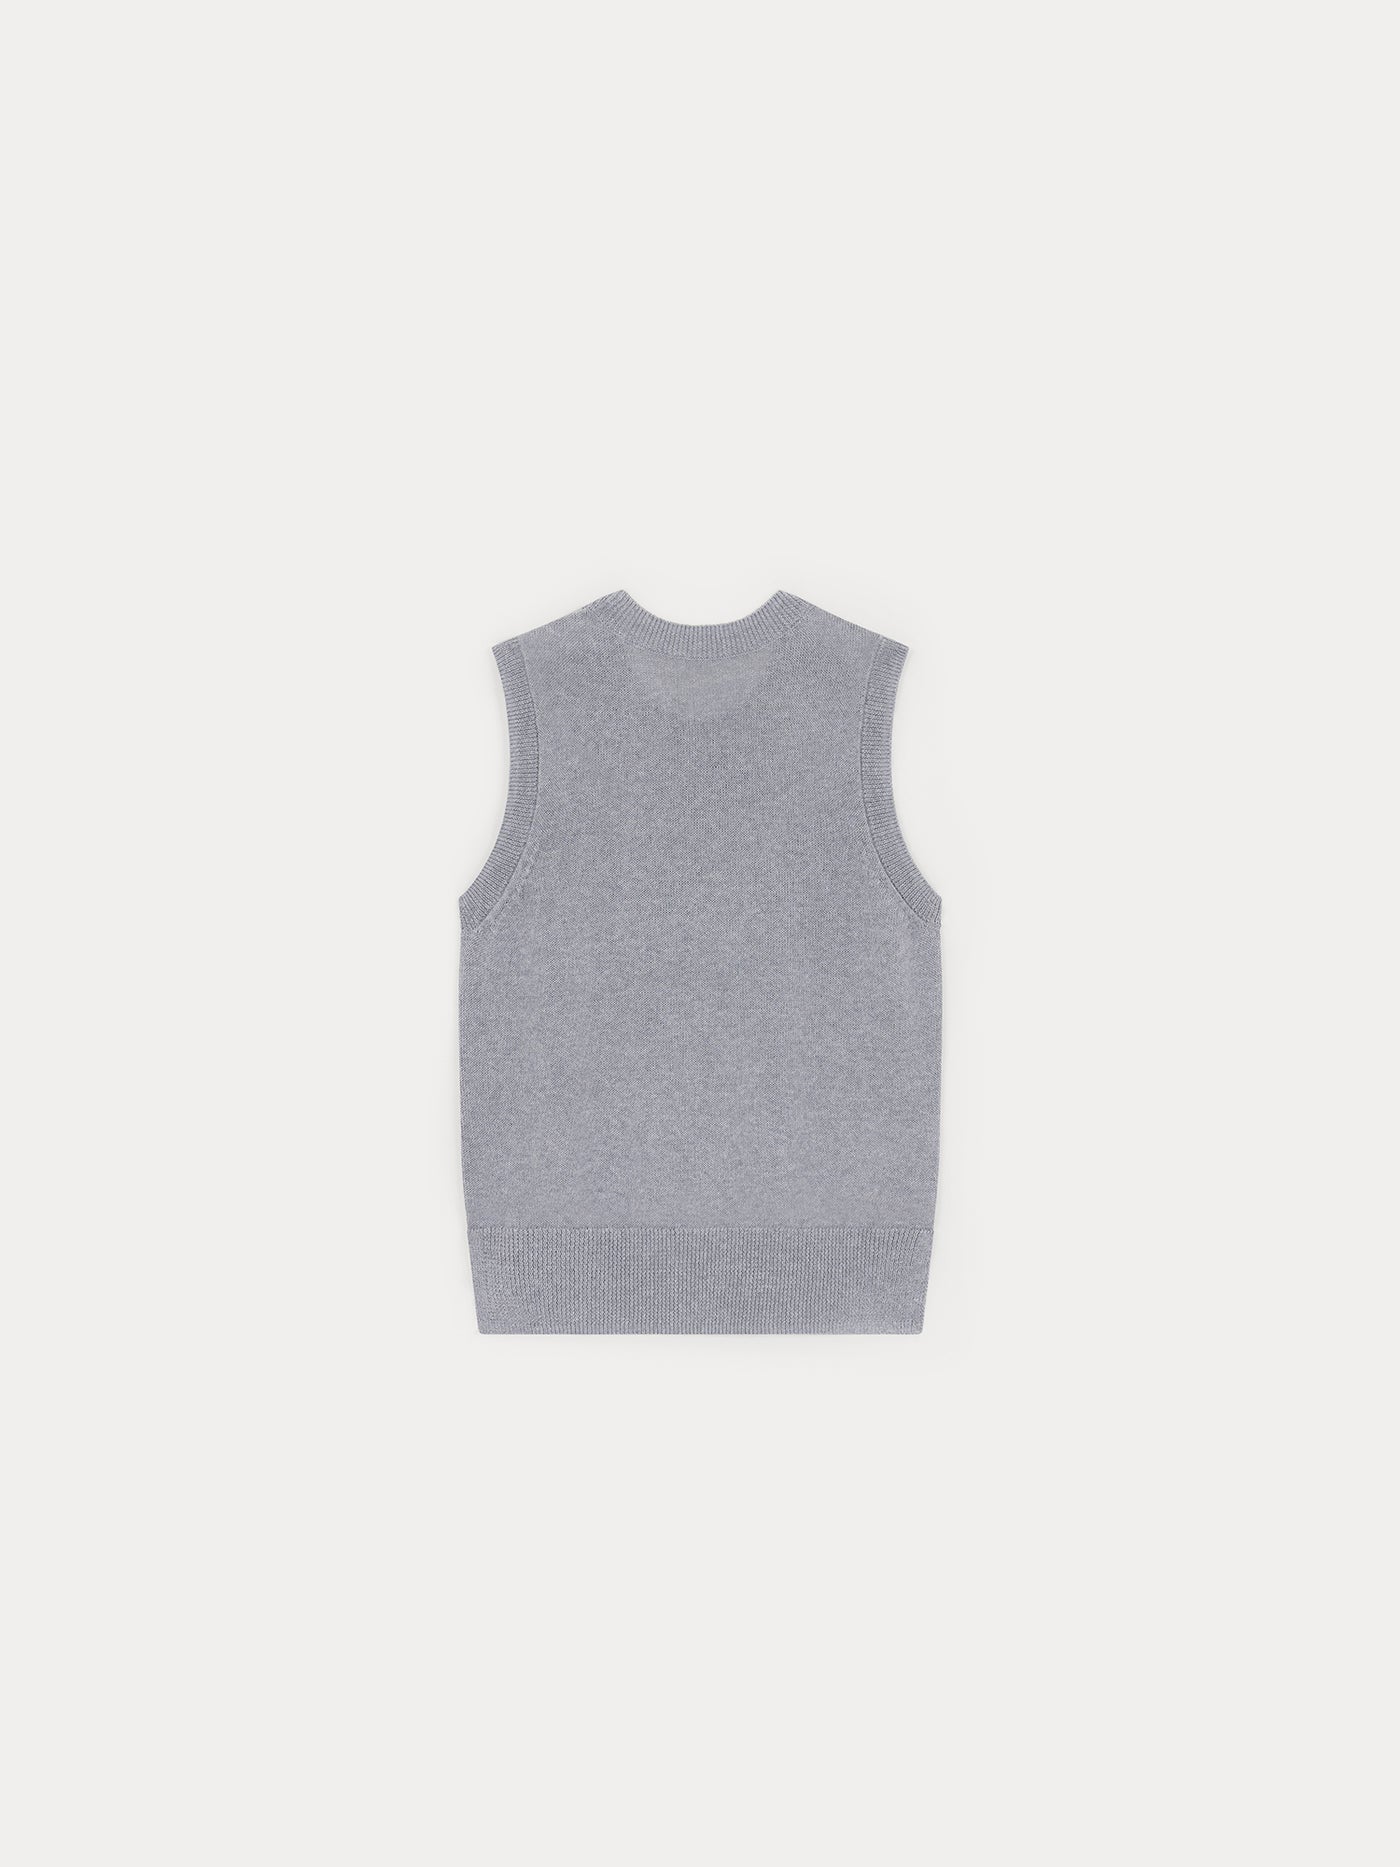 Northern blue sleeveless vest in cotton and linen